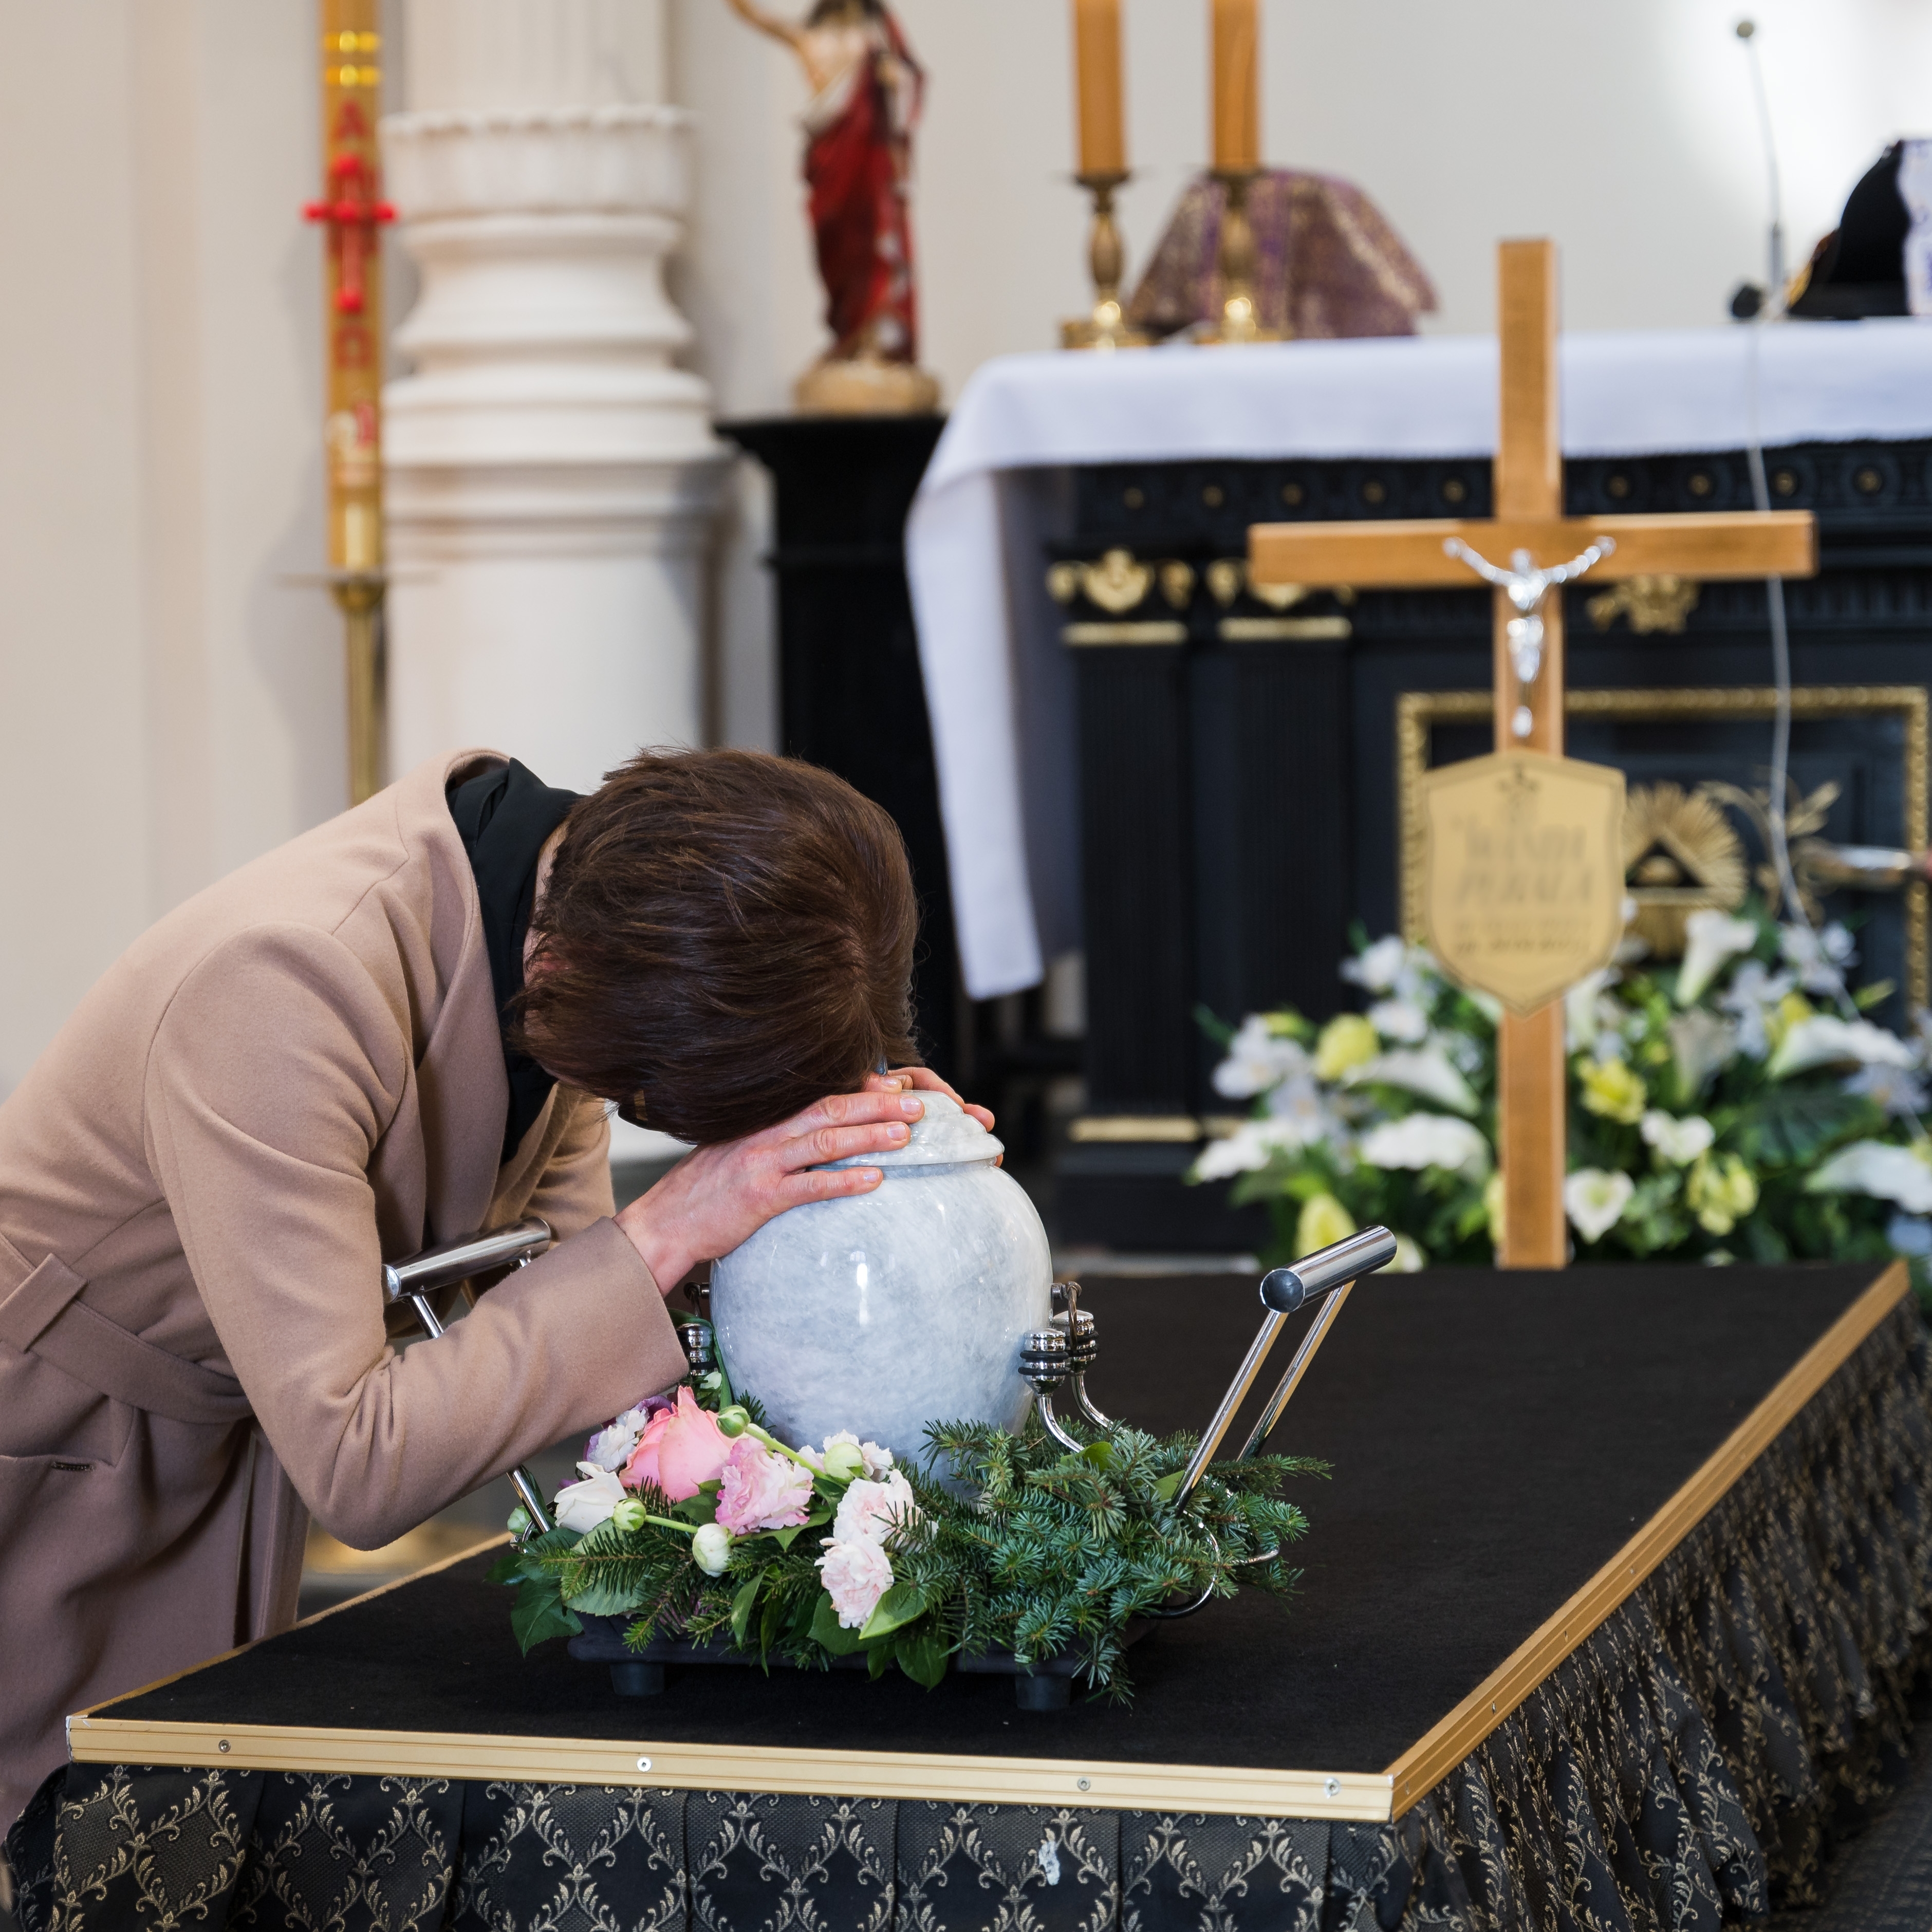 A woman crying over the urn of a loved one during a funeral | Source: Shutterstock